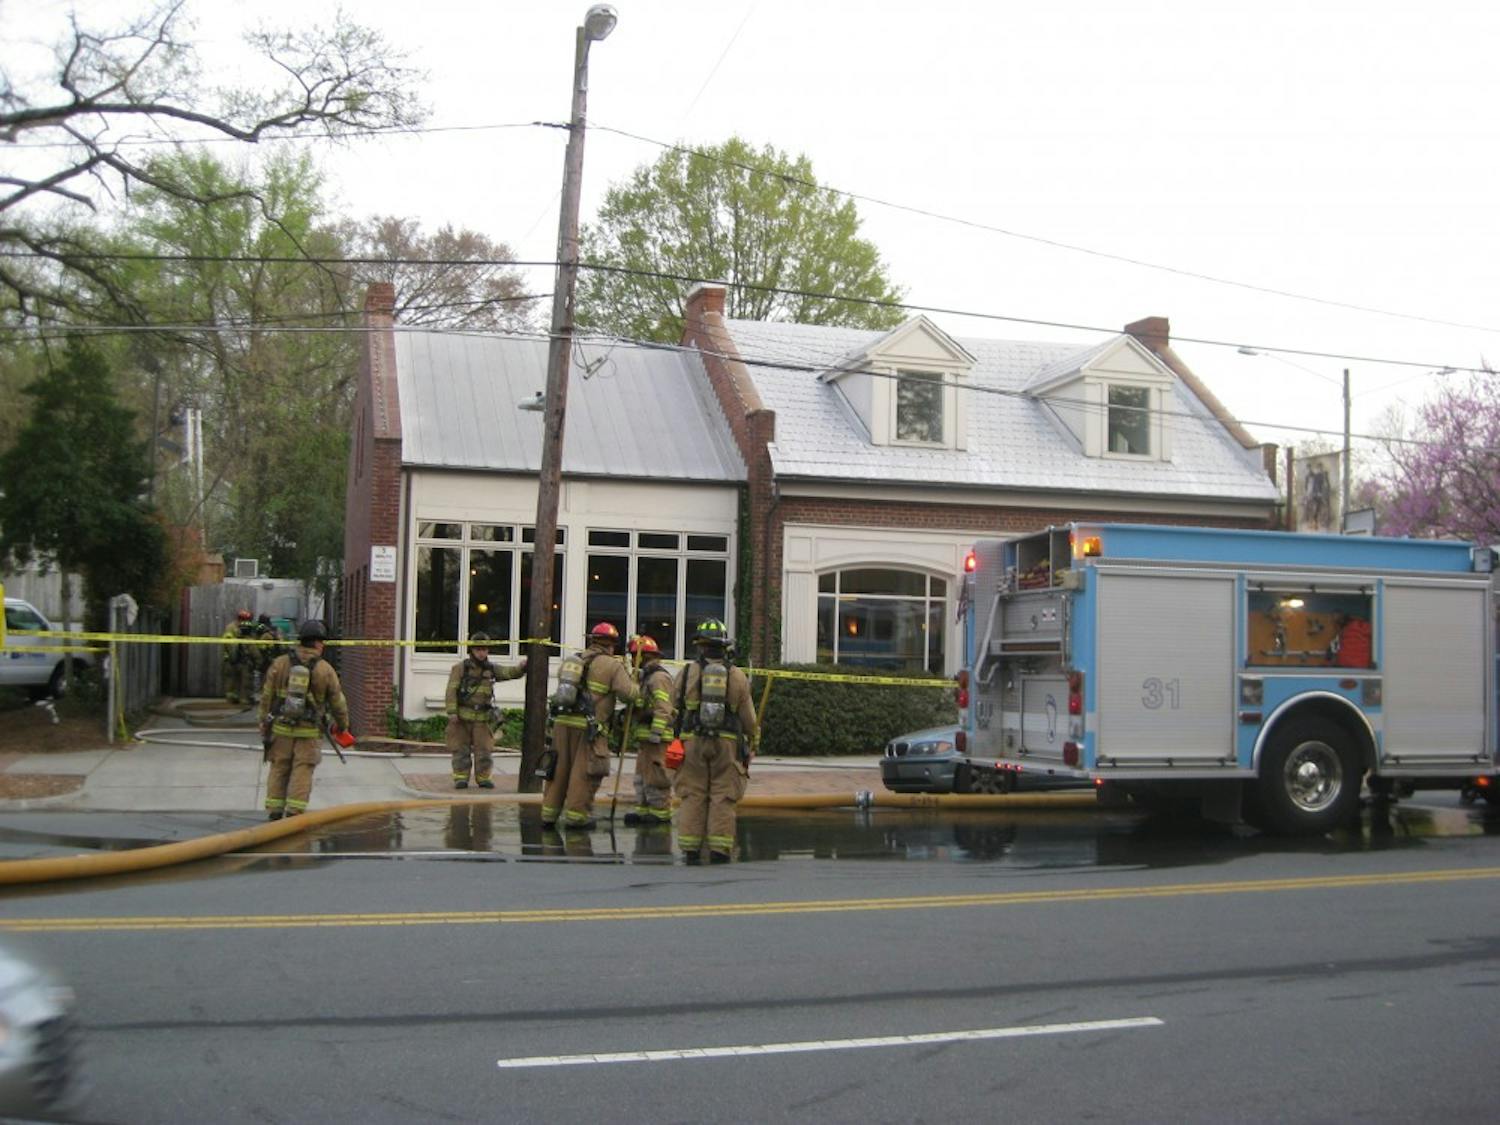 The Chapel Hill Fire Department responded to a kitchen fire at 411 West. Courtesy of David Enarson